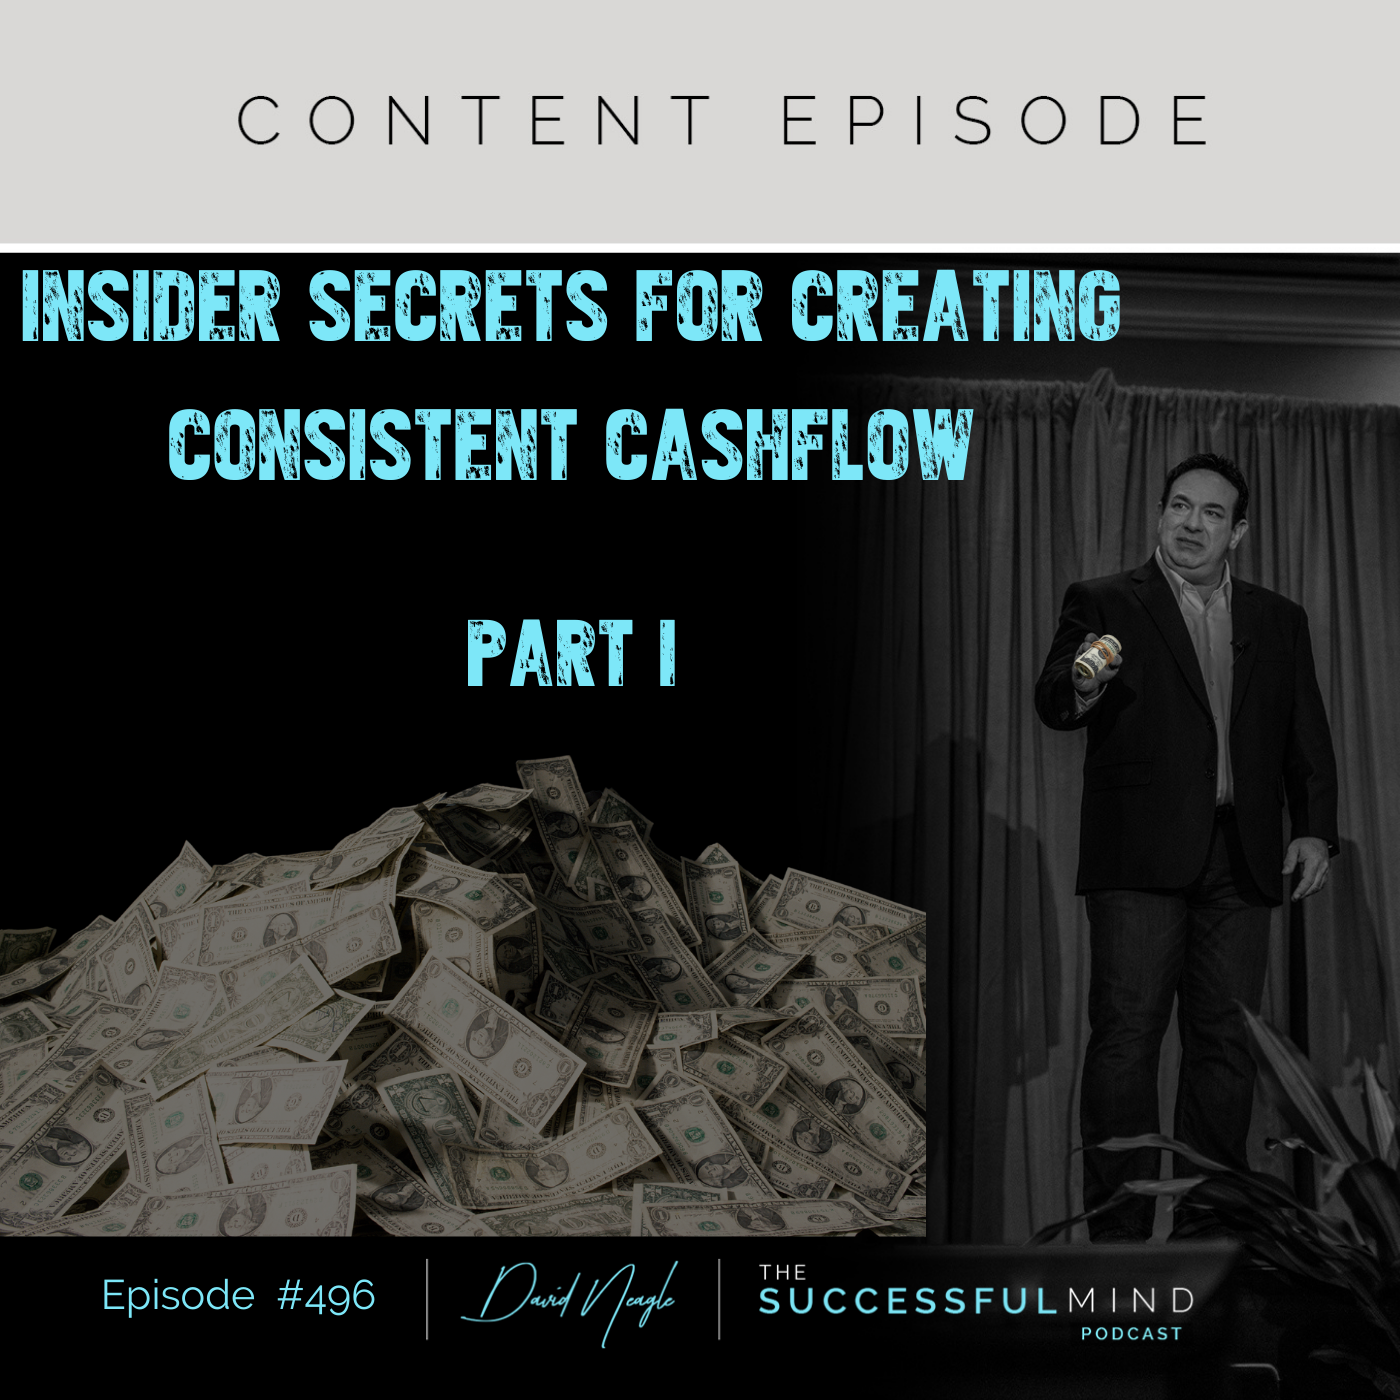 The Successful Mind Podcast – Episode 496 – Insider Secrets for Creating Consistent Cashflow – Part I